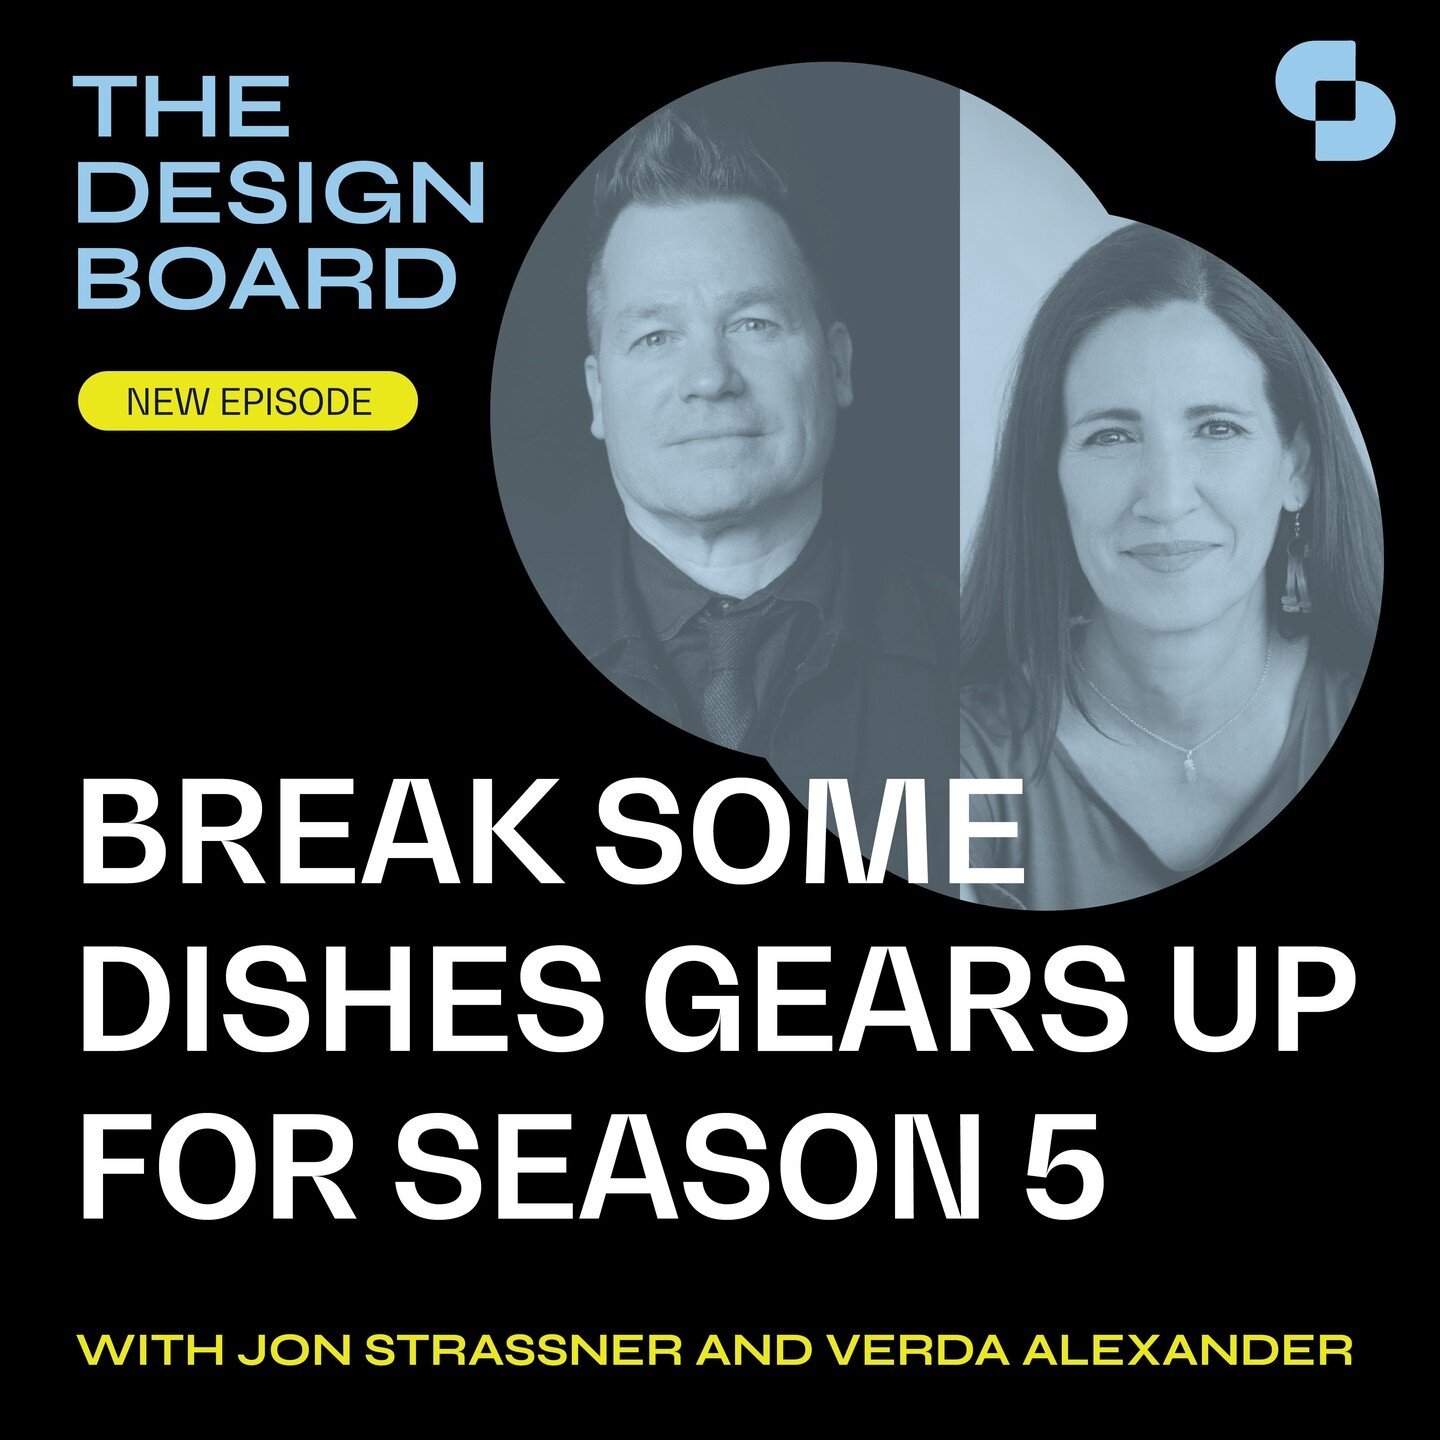 This week's episode of The Design Board features a never-before-heard sneak peek into season 5 of the @breaksomedishes podcast!

Tiffany Rafii sits down with @jonstrassner and @verdaalexander to discuss the upcoming season of their ground-breaking po